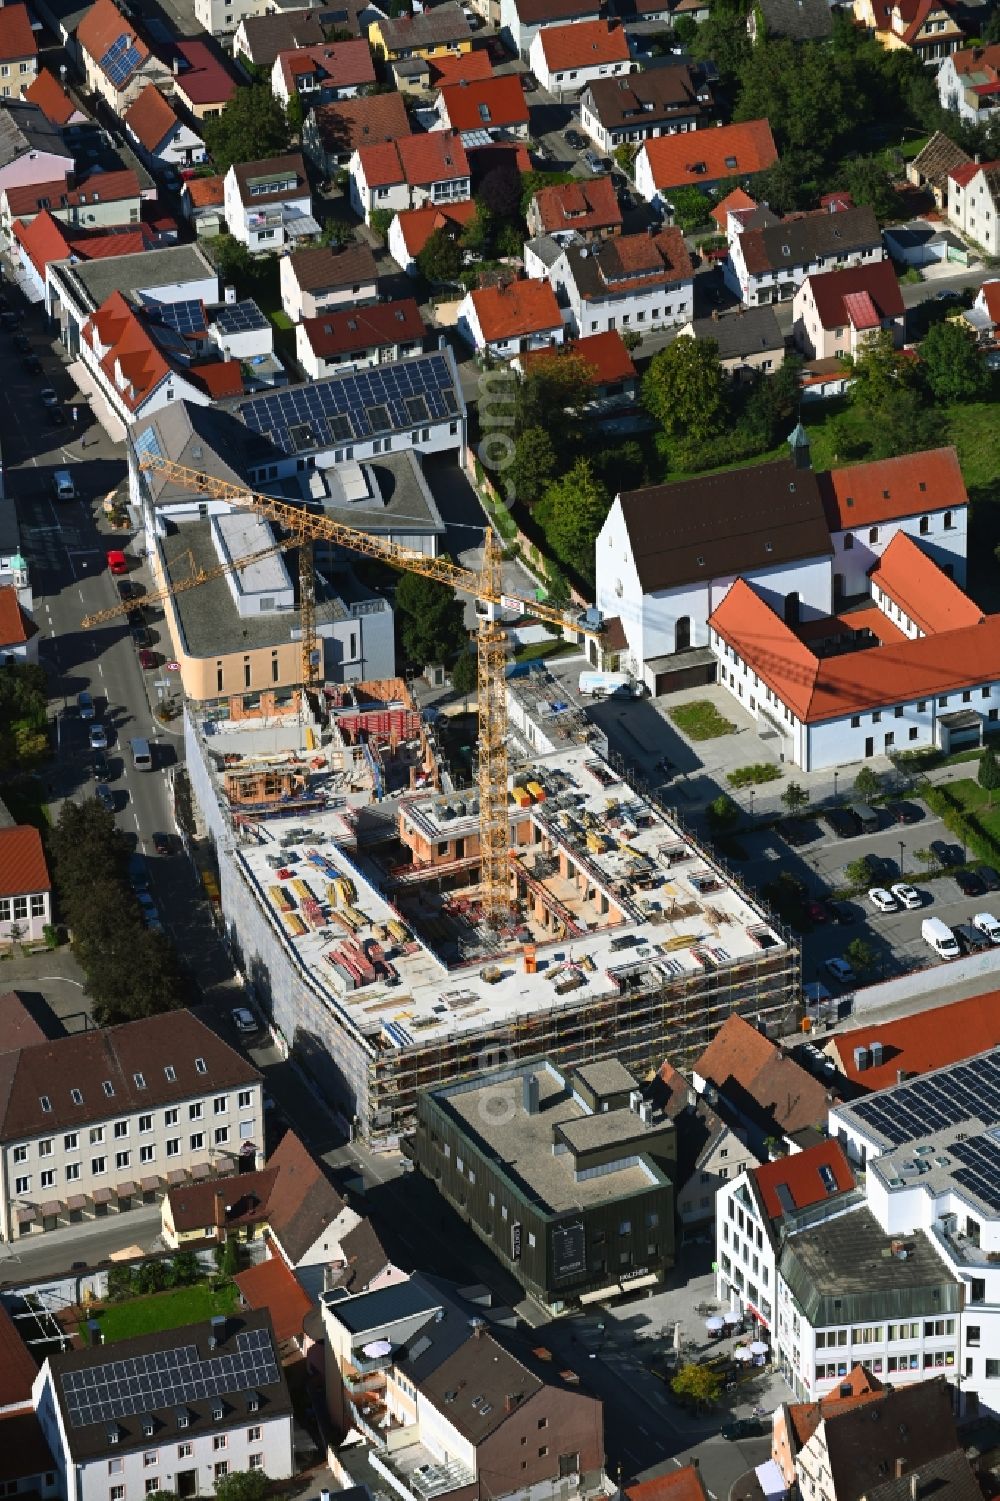 Aerial image Dillingen an der Donau - Construction site for the new residential and commercial building on Kapuzinerstrasse corner Waisenhaisgaesschen in Dillingen an der Donau in the state Bavaria, Germany